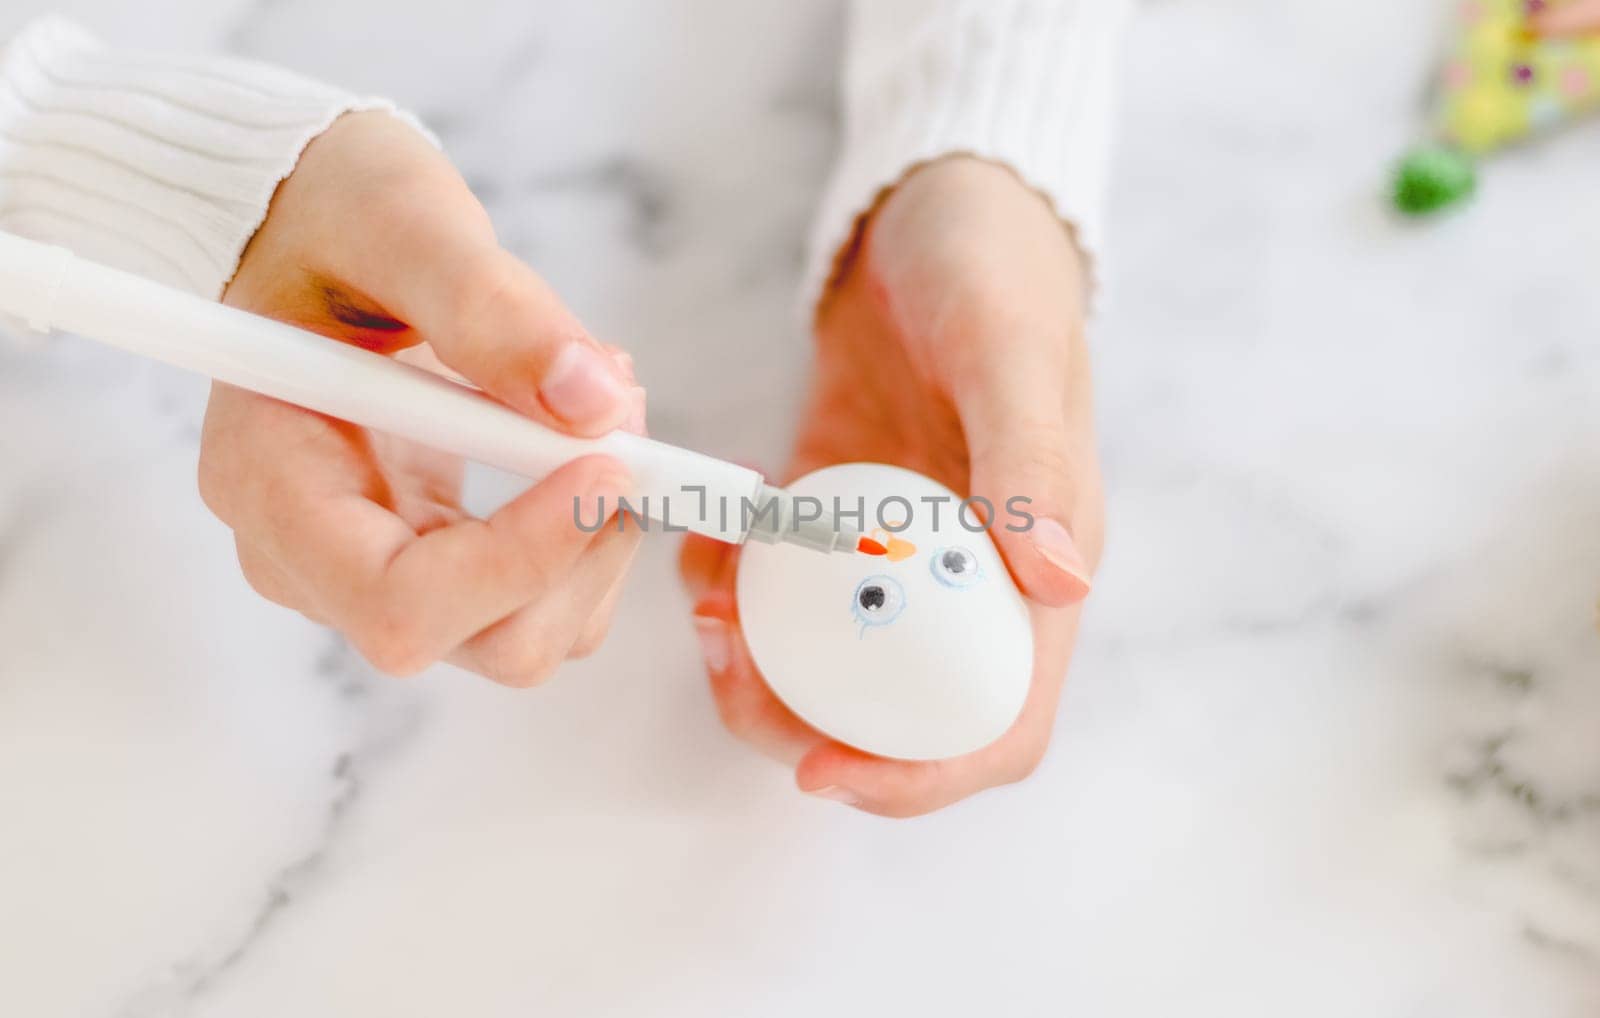 The hands of a caucasian girl in a white turtleneck draw with a marker on an egg the muzzle of an easter bunny on a marble table for diy preparation for the easter holiday, close-up top view. The concept of crafts, needlework, minimalism,artisanal,at home,children art,children creative.